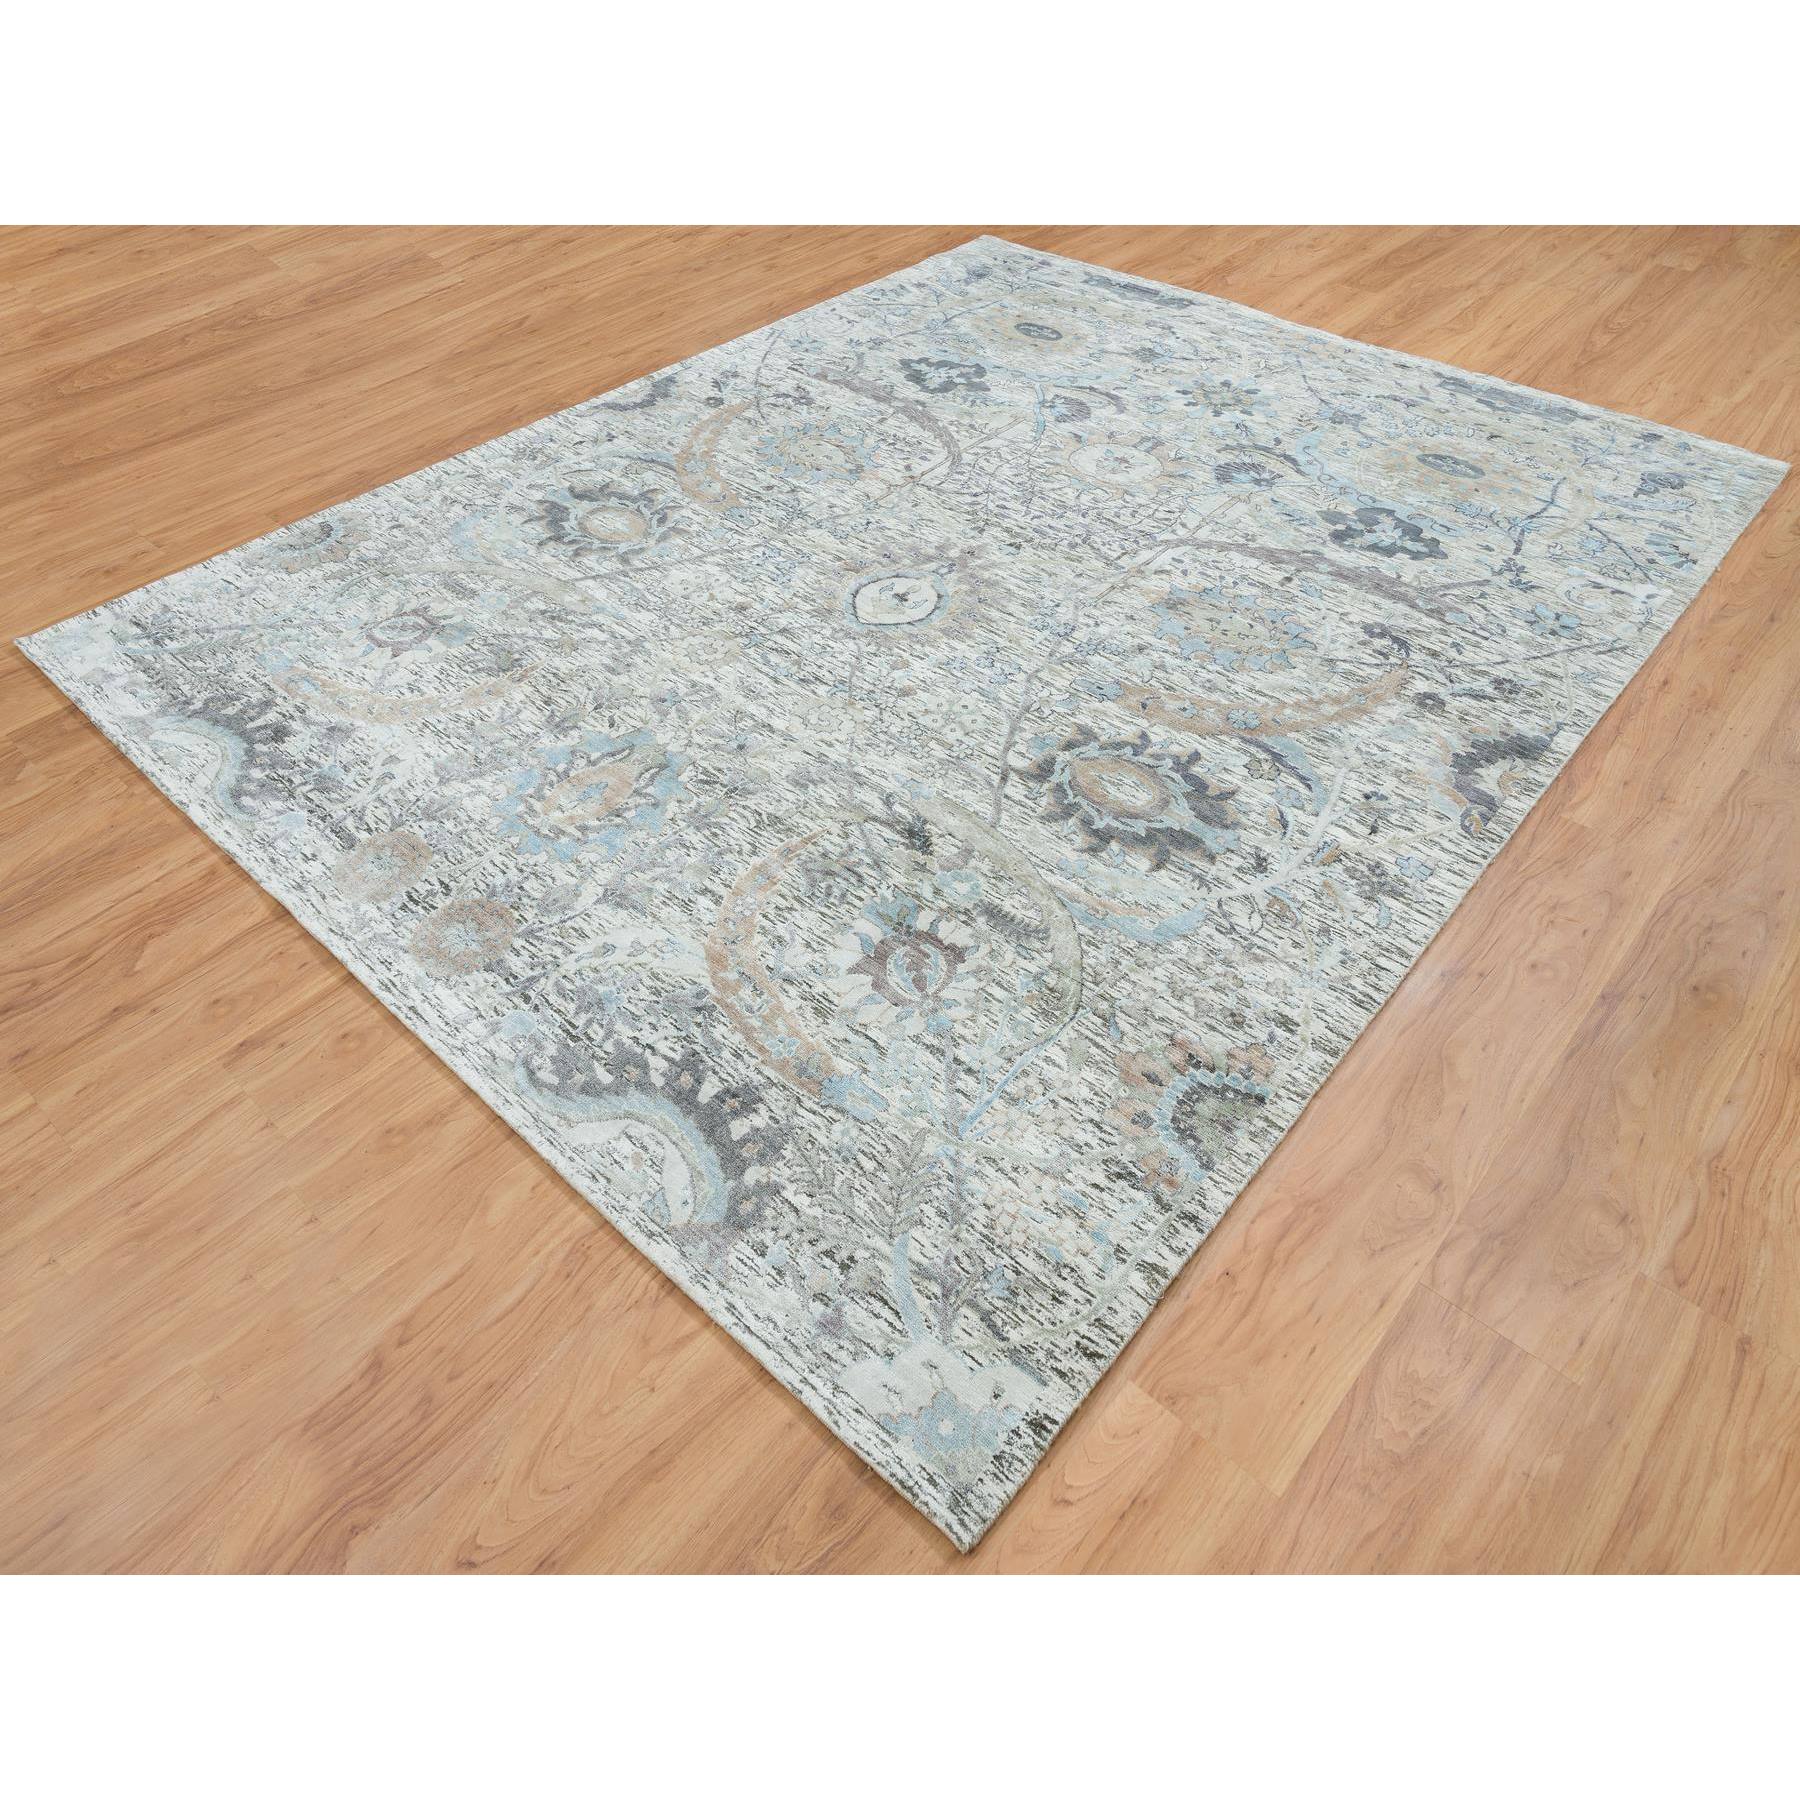 8'x10'1" Ivory, Sickle Leaf Design Soft Pile, Silk With Textured Wool Hand Woven, Oriental Rug 